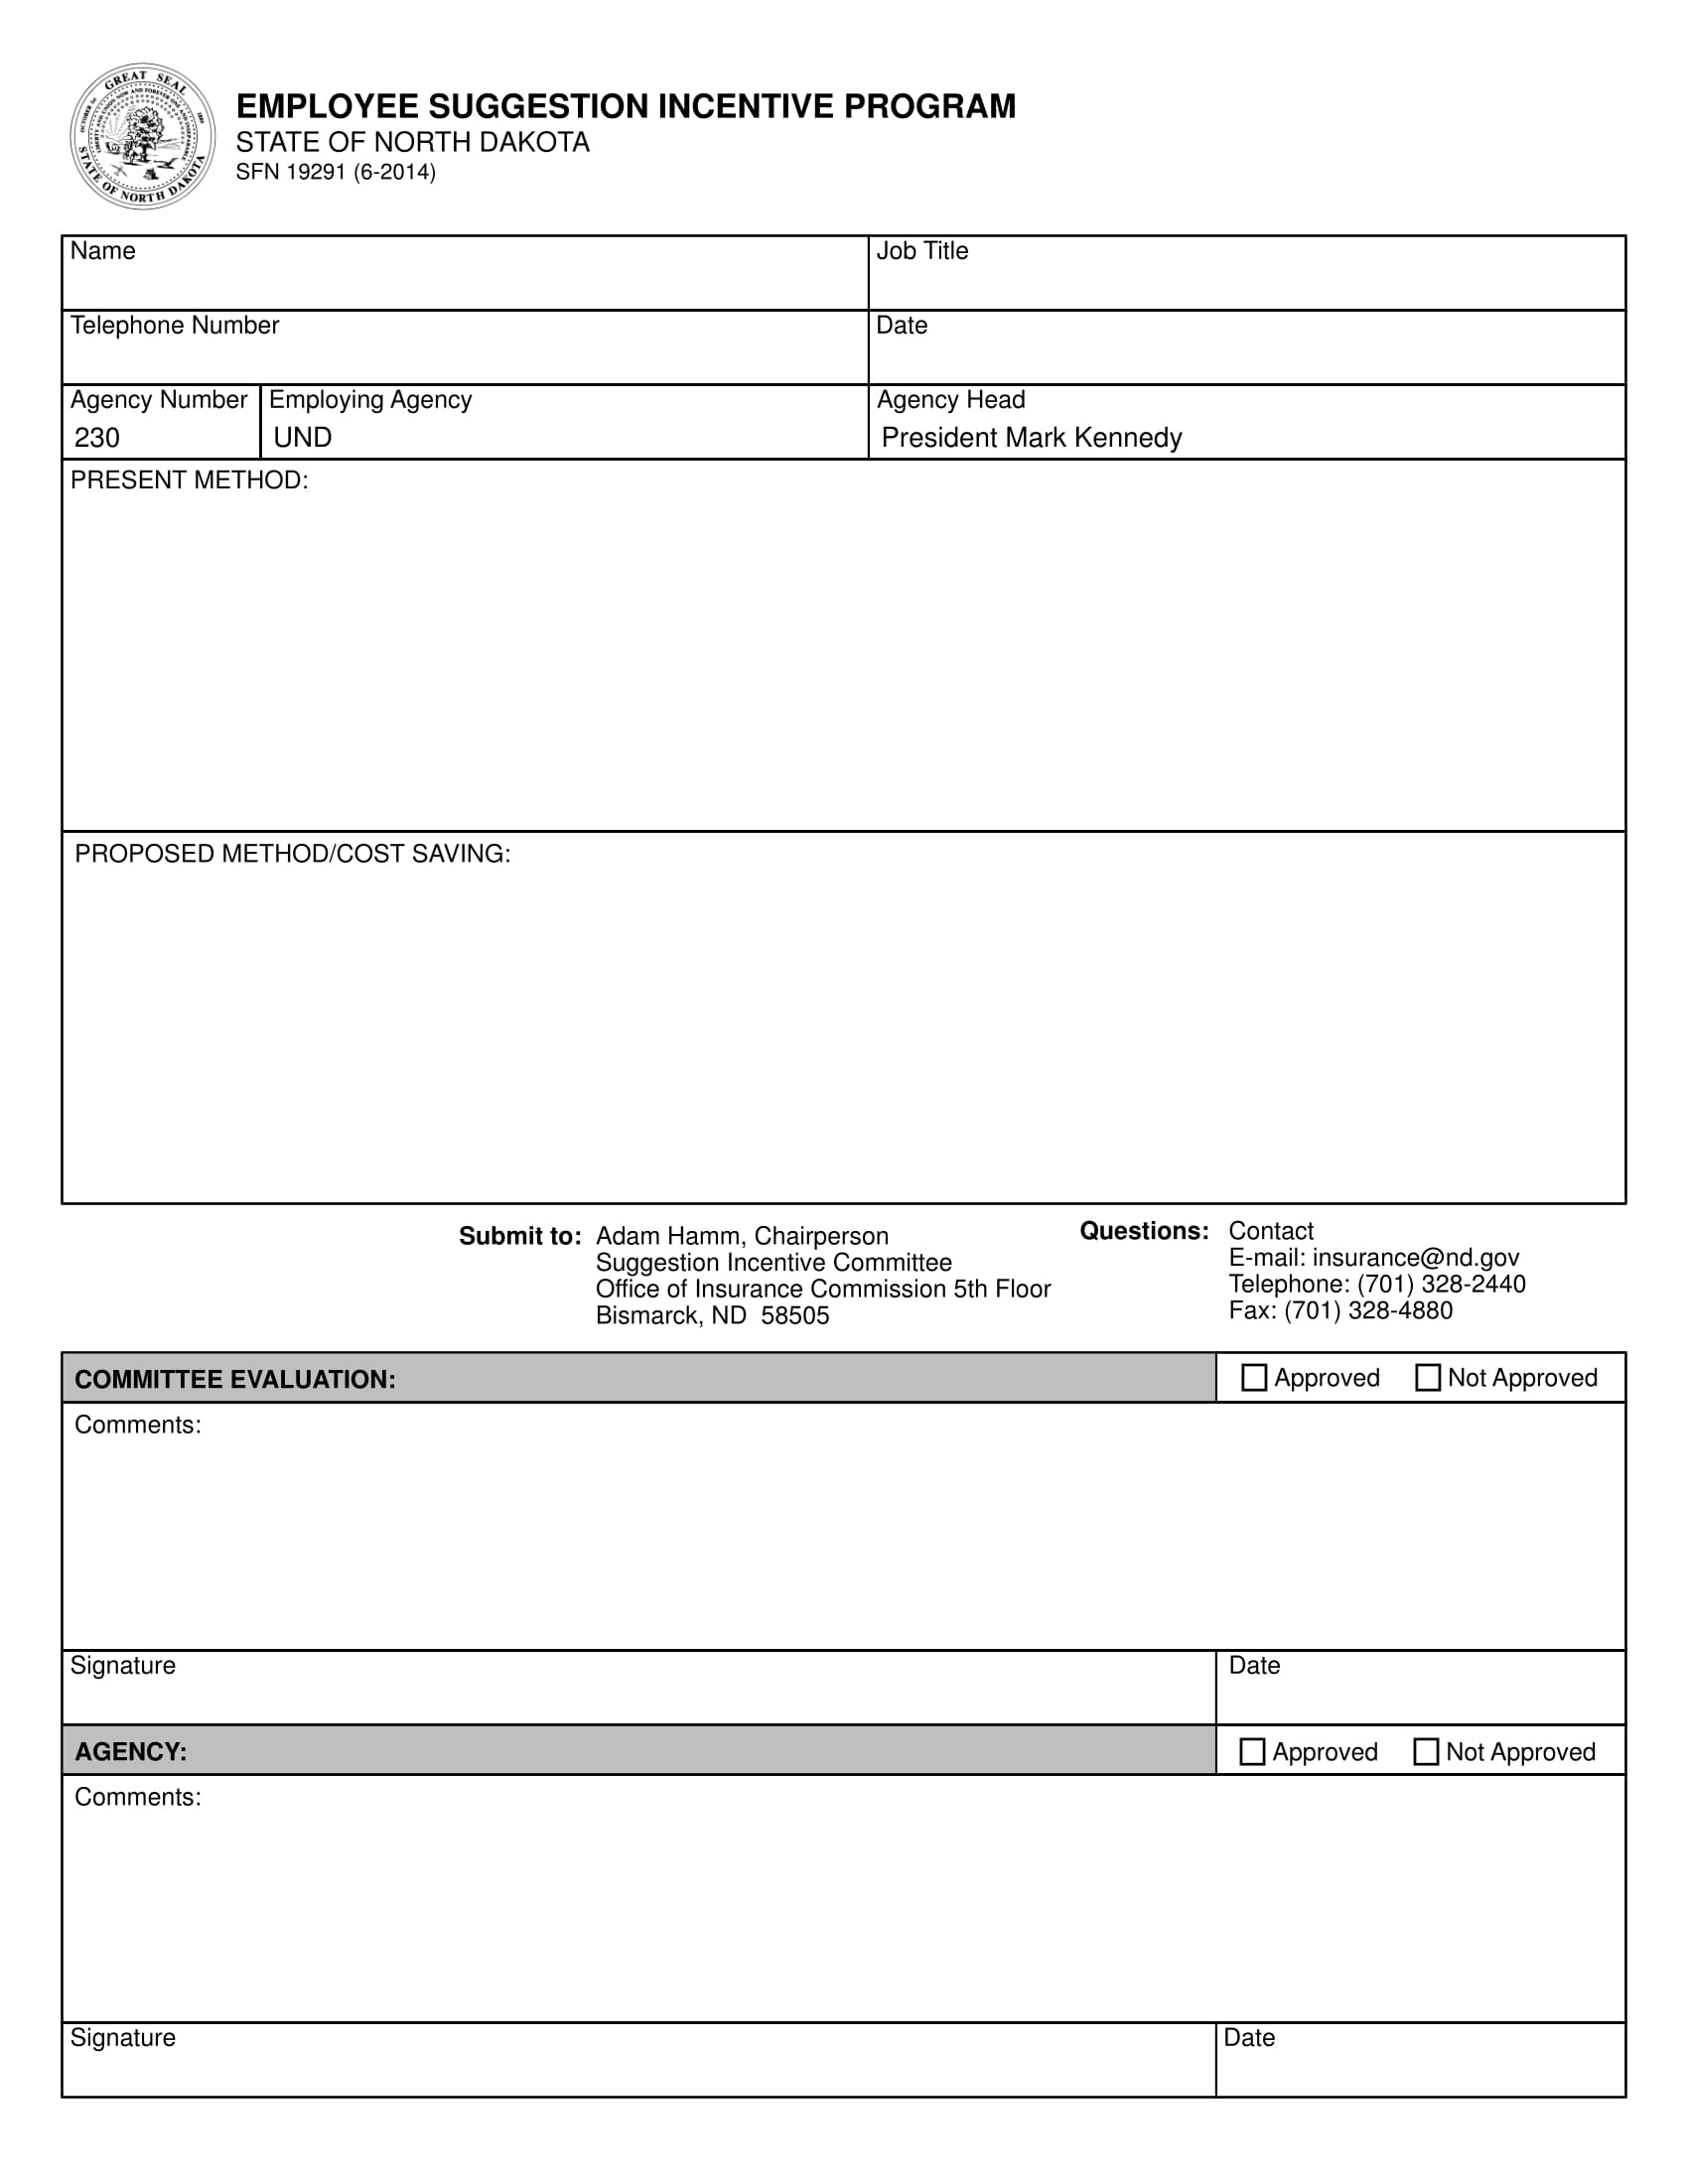 employee suggestion incentive program form 1